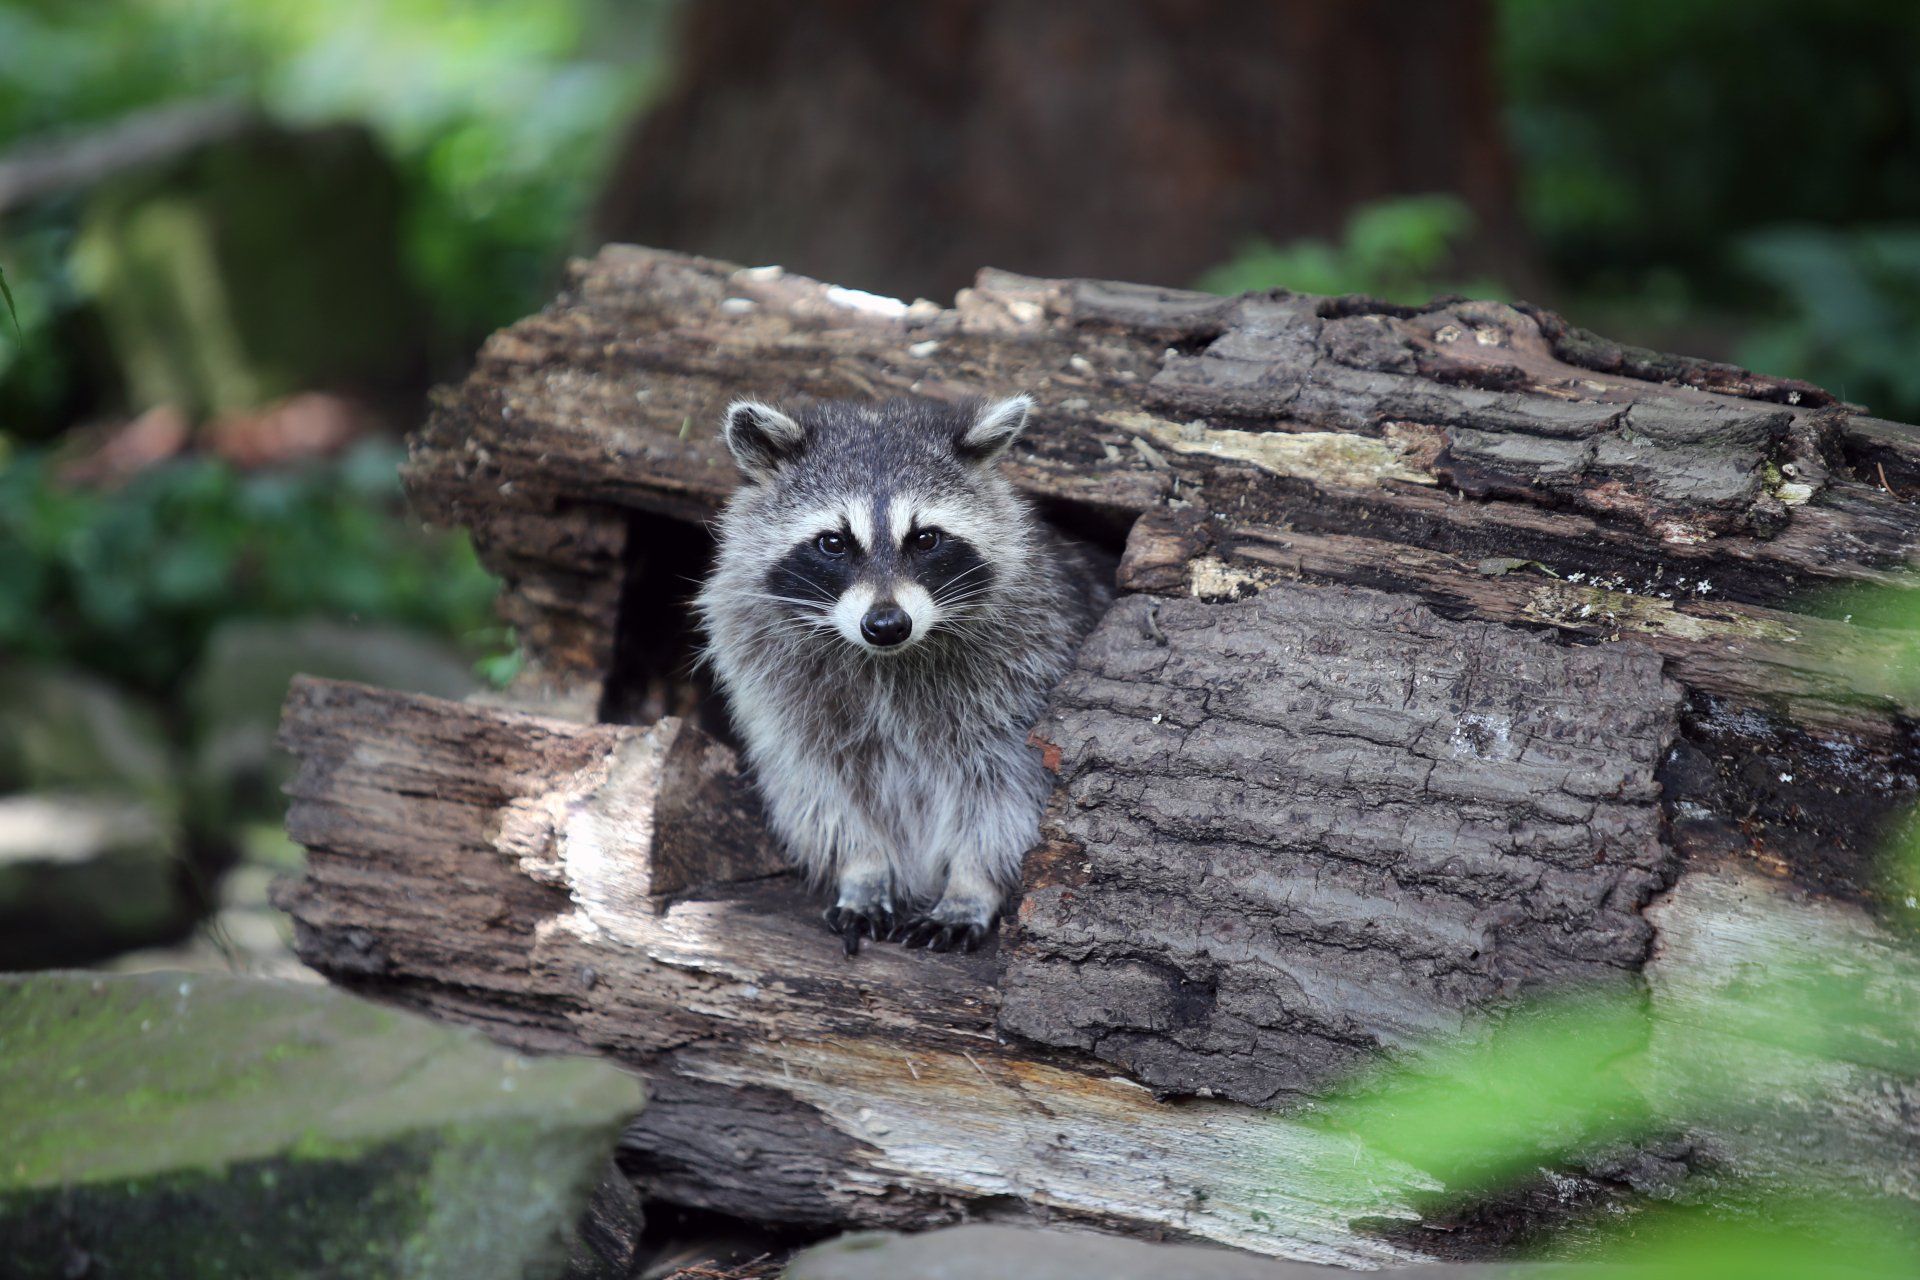 A racoon sitting and chilling in the wild